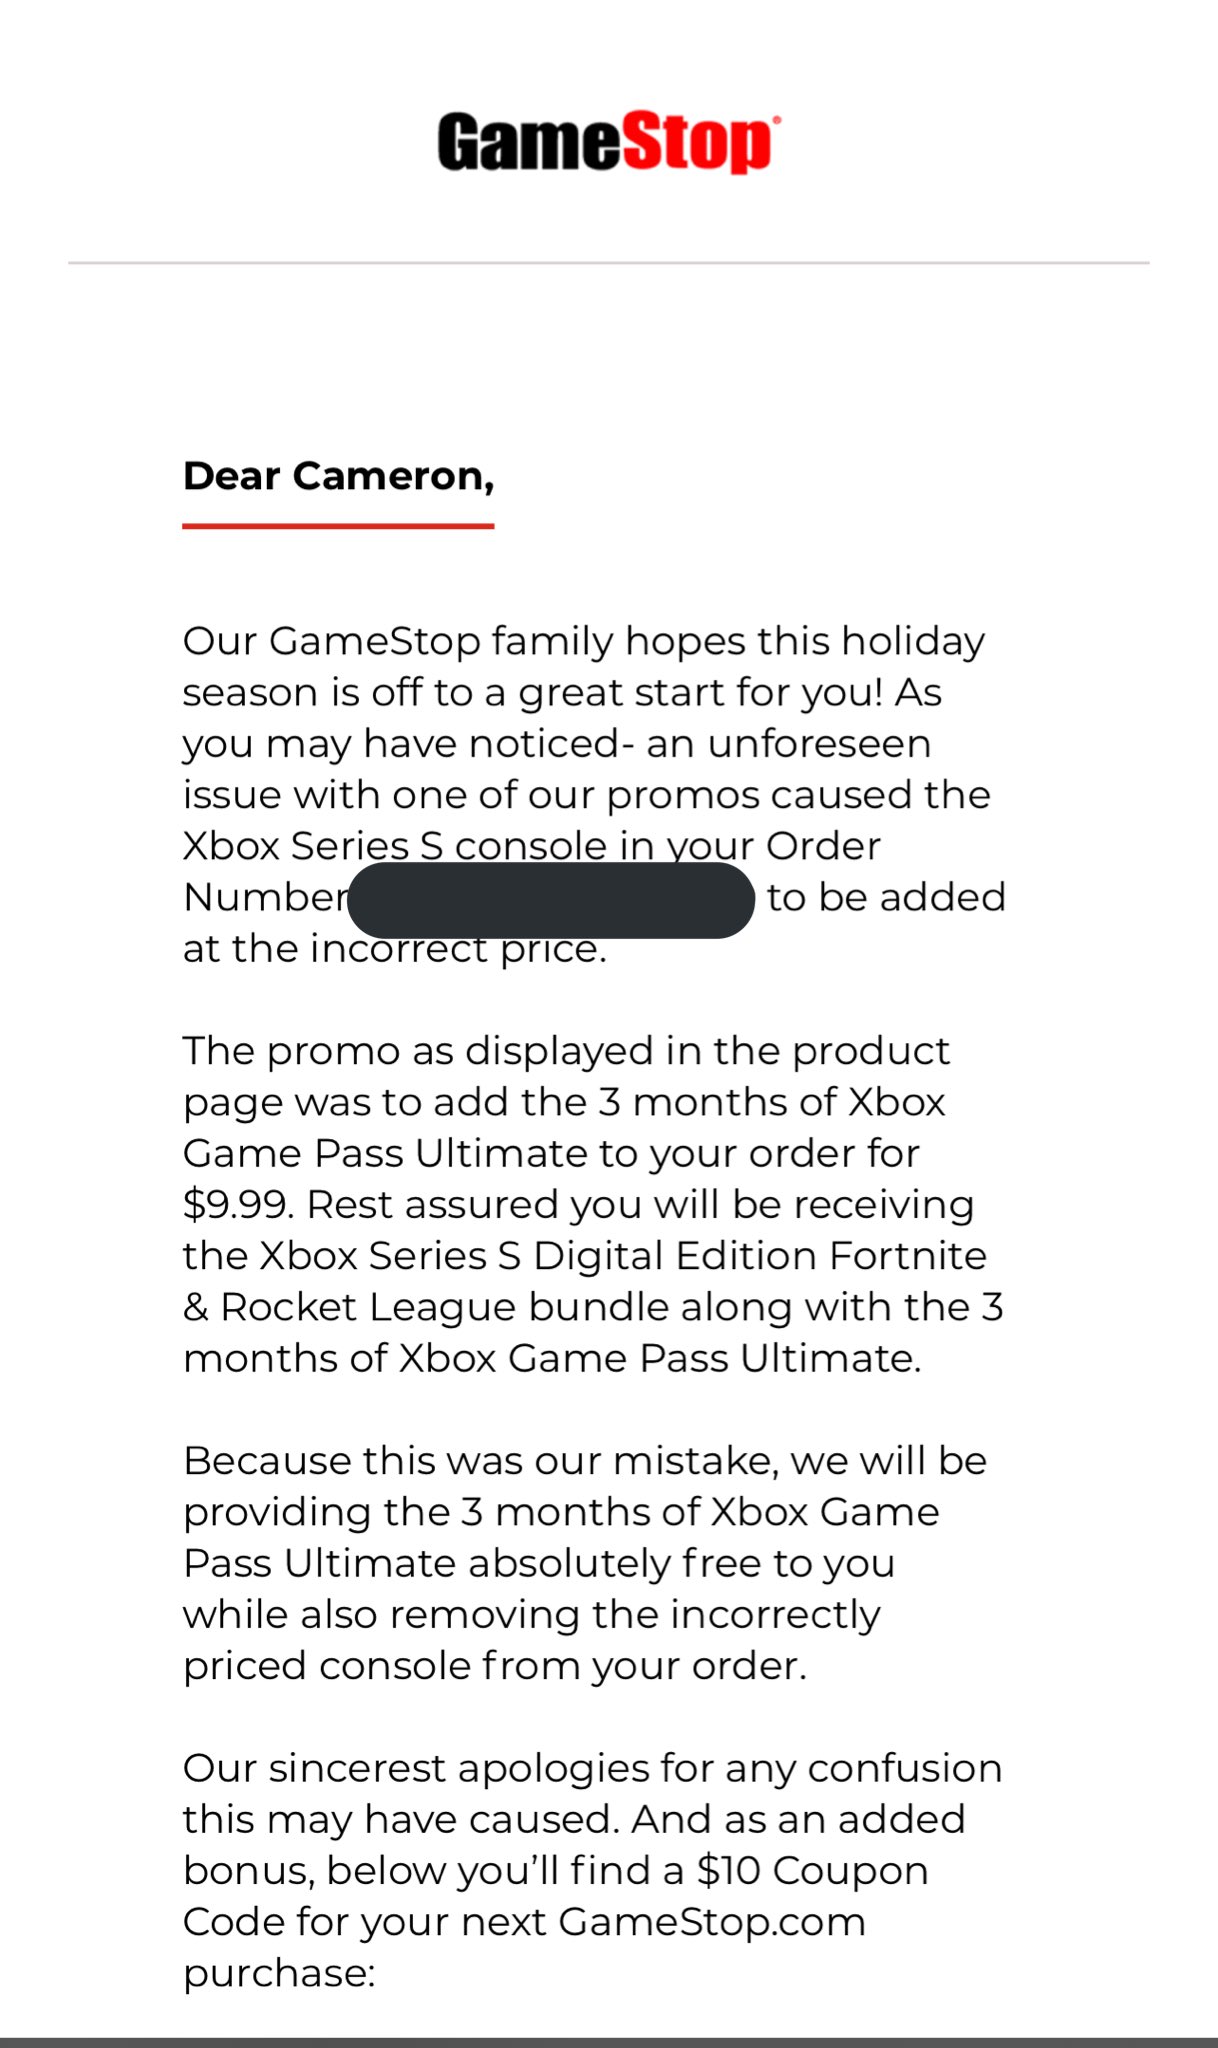 KillerCam1020🎮 on Twitter: "Series S glitch orders are being cancelled  (we're all so surprised 😂) however if you did get an order in gamestop is  sending out apology letters with free gamepass